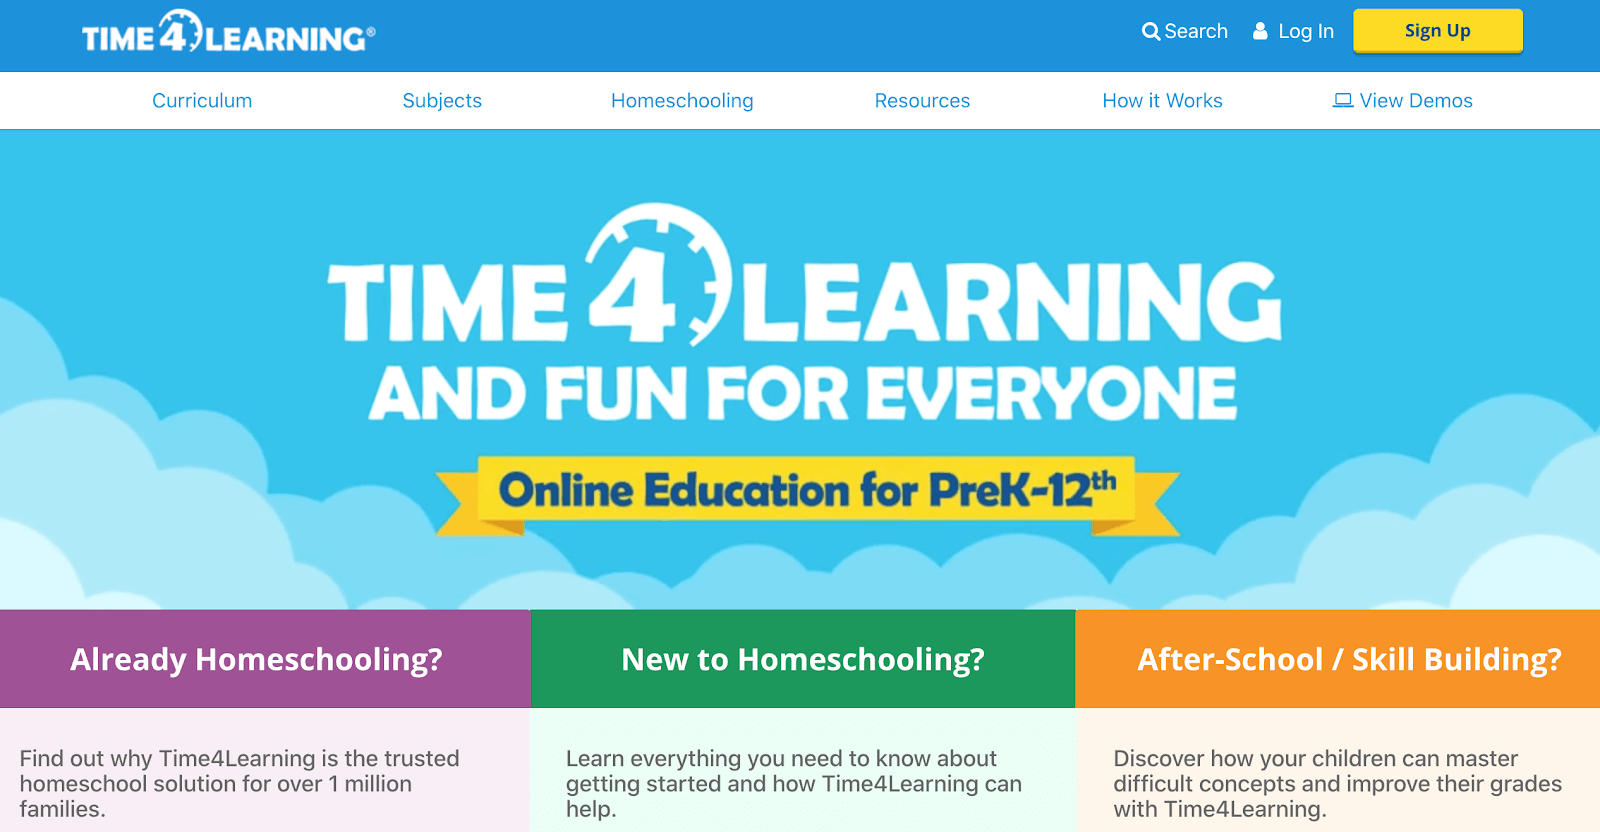 Build an elearning marketplace like Time4Learning